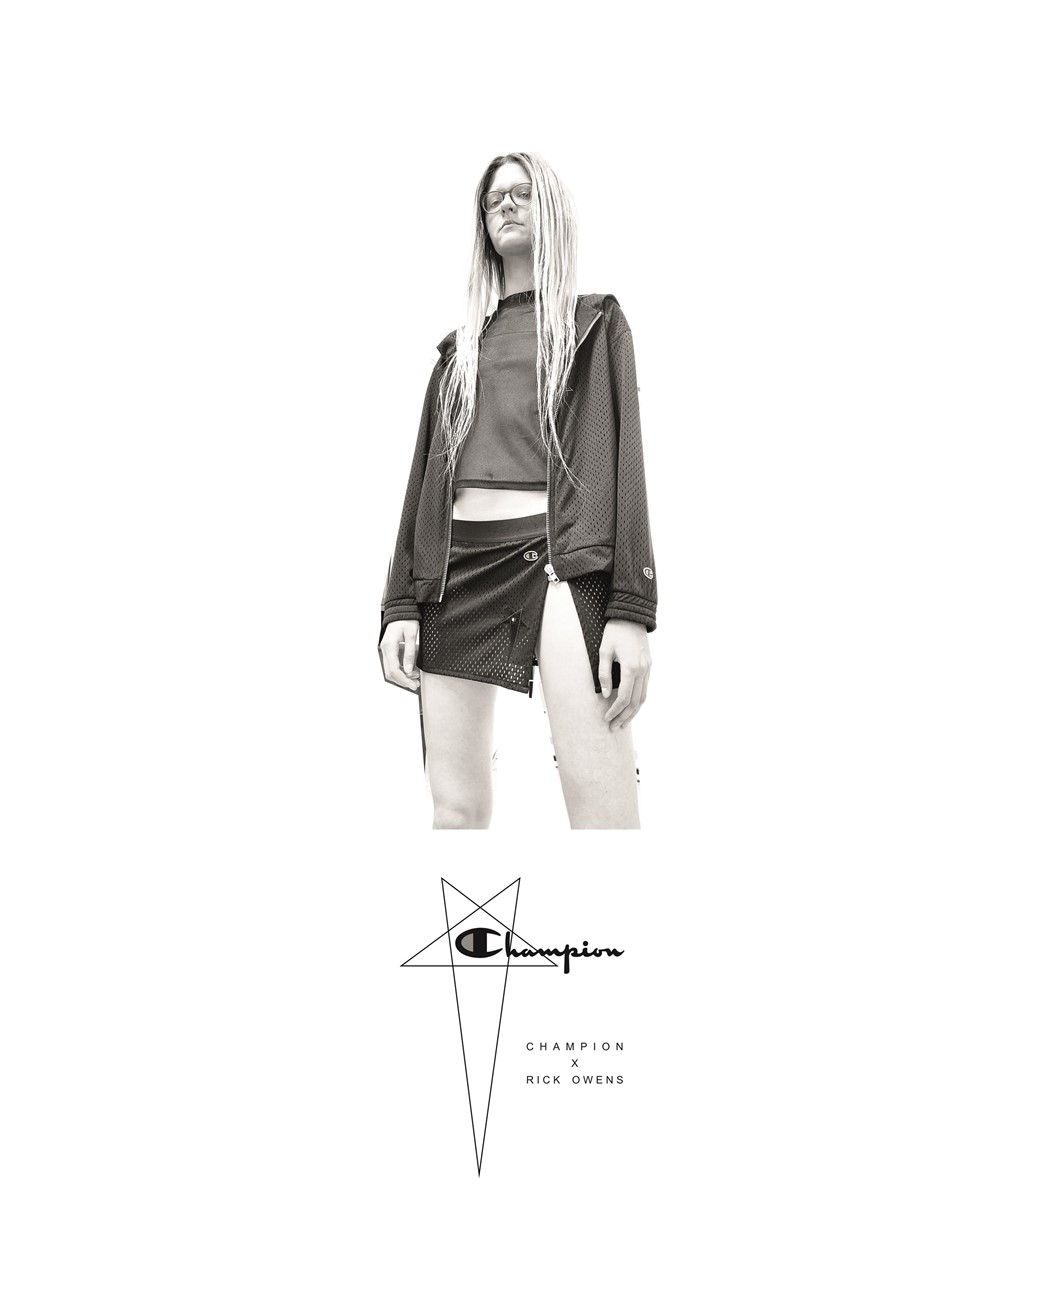 rick-owens-champion-launch-date-march-2020 (14)